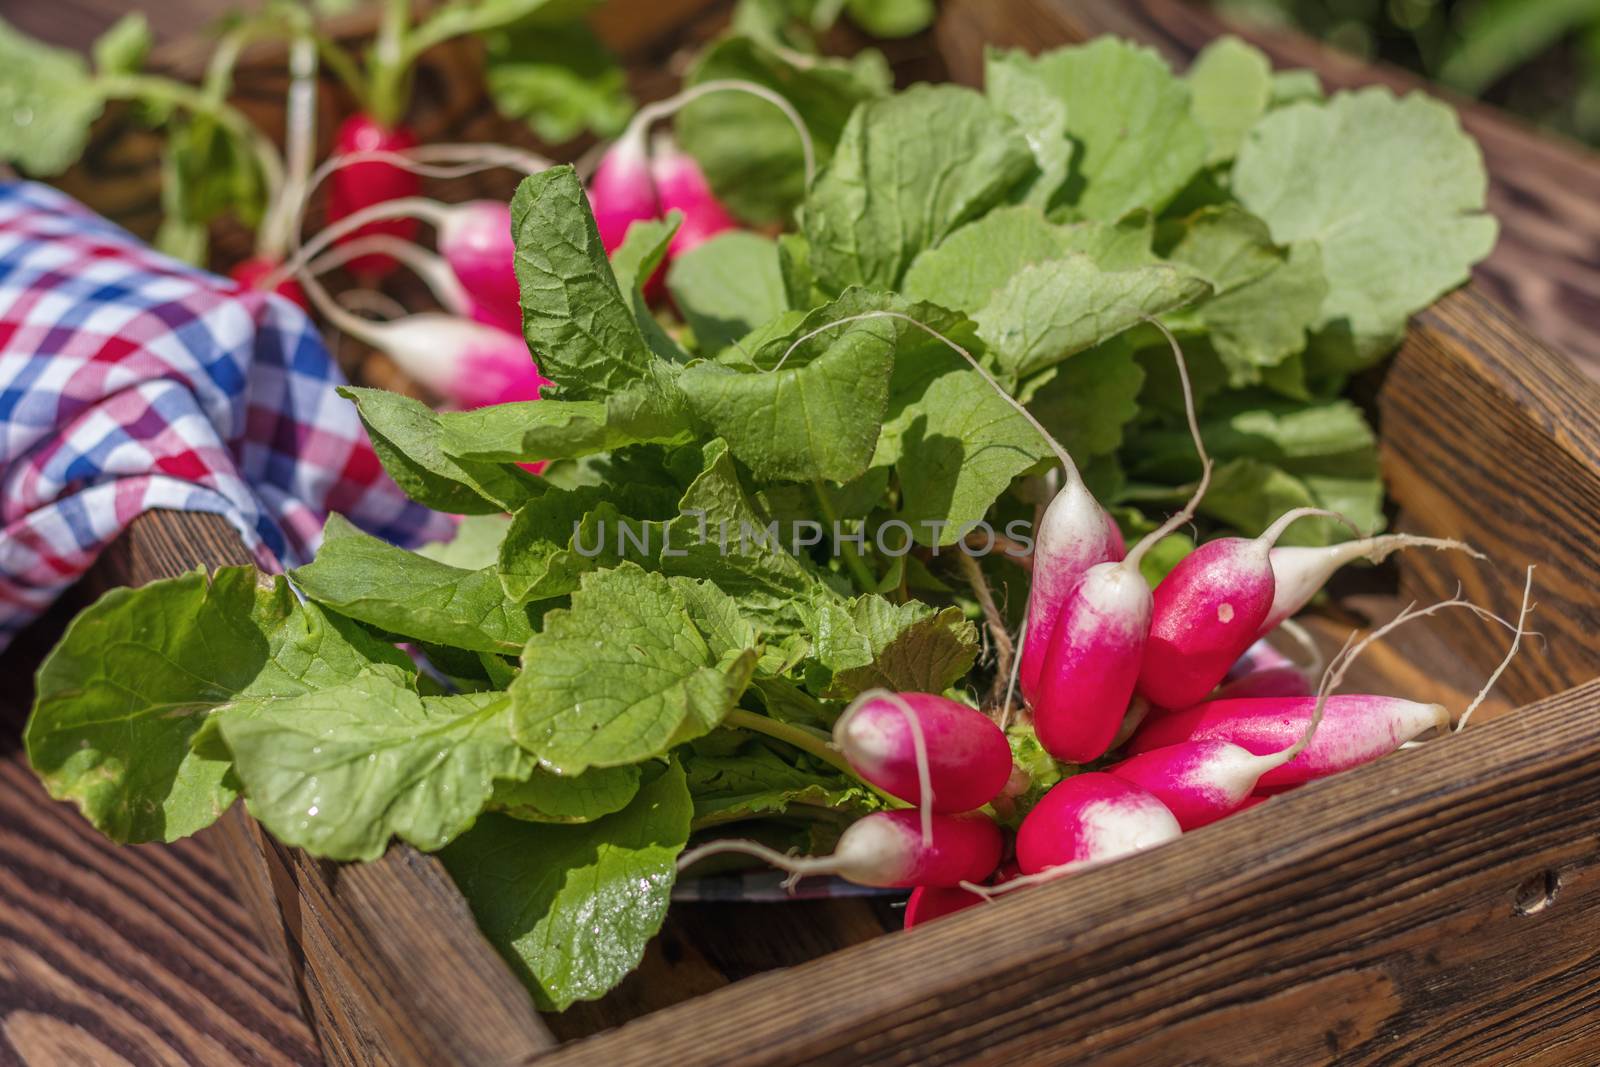 Bunch of fresh radishes in a wooden box outdoors on the table. Bunch of fresh radishes in a wooden box outdoors on the table